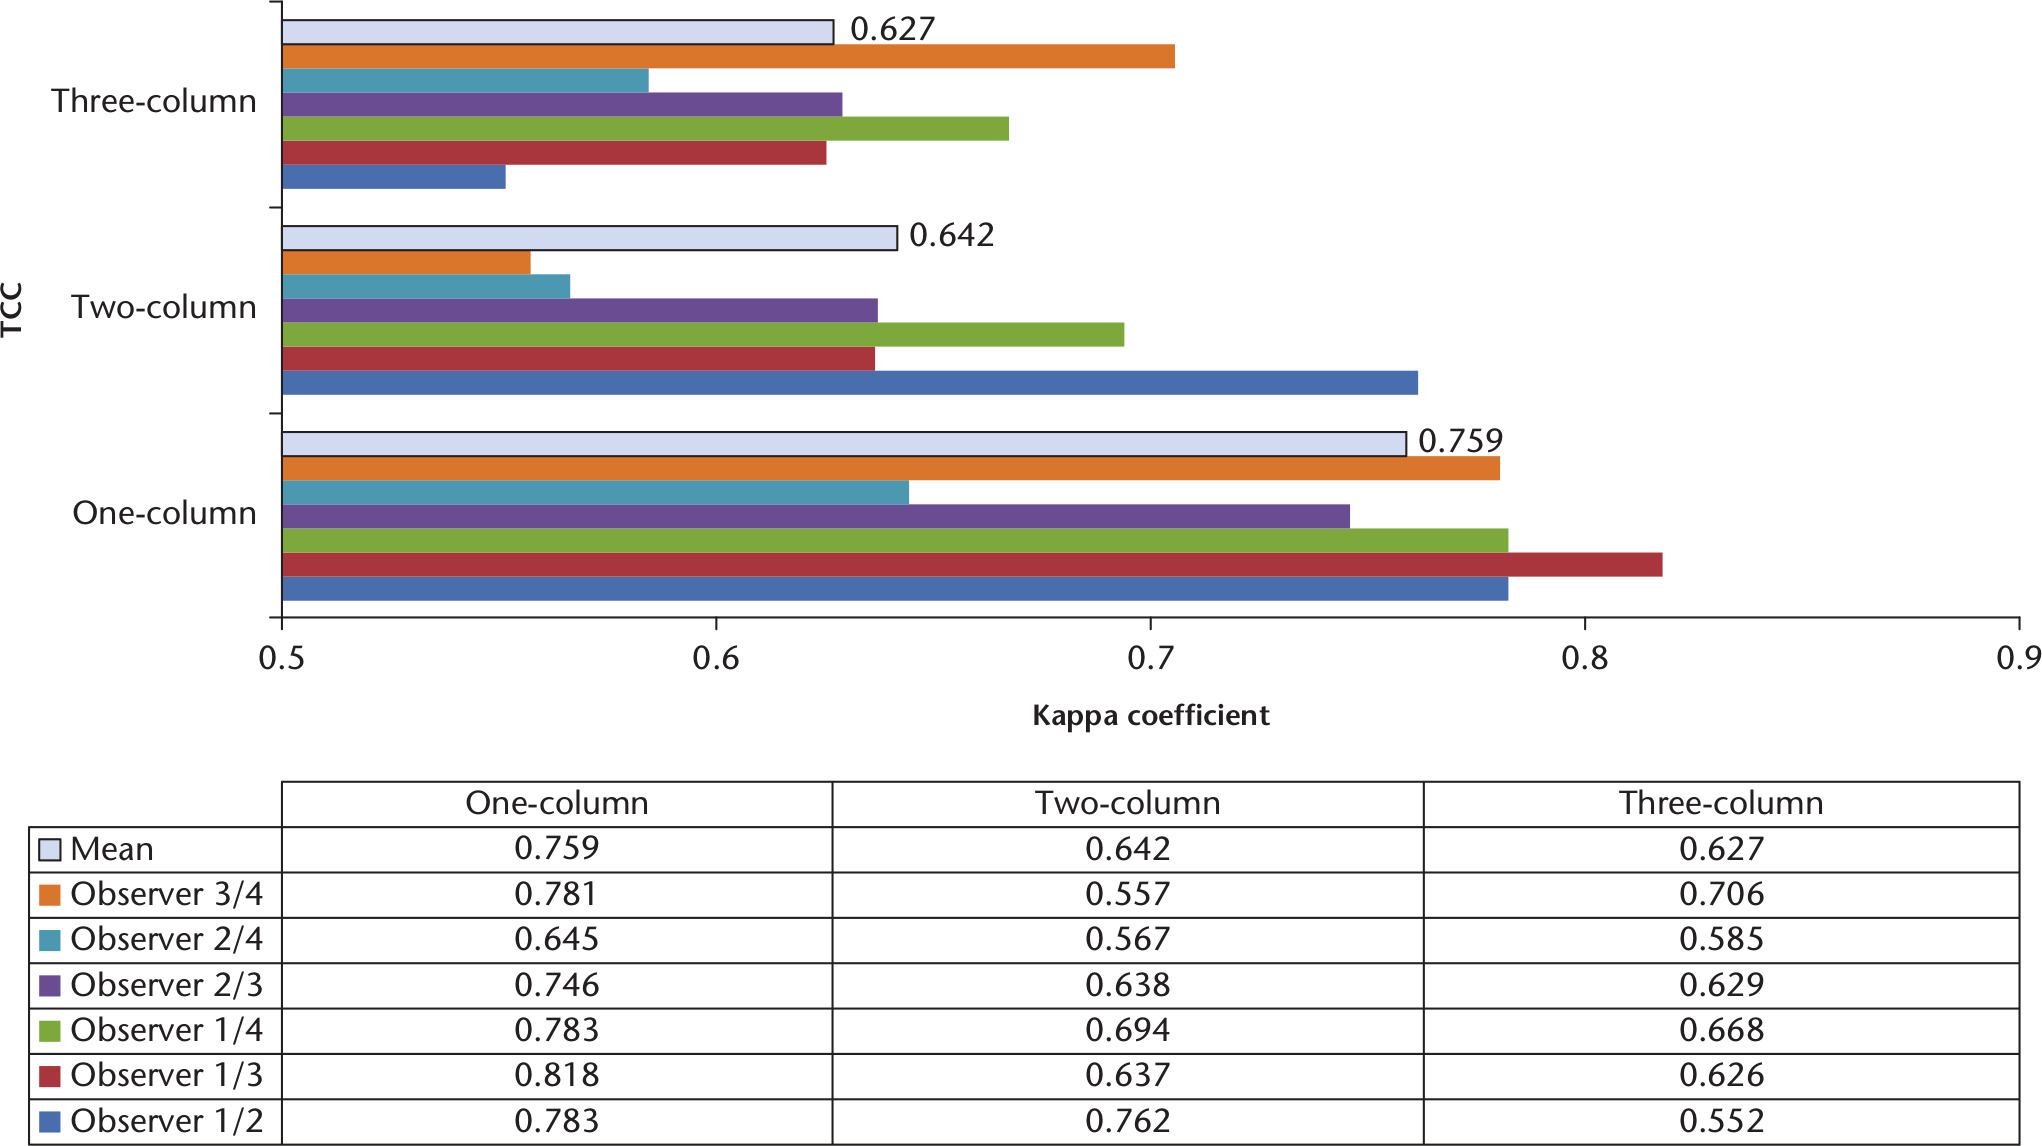 Fig. 7 
          Kappa coefficients for interobserver reliabilities of different groups based on three-column classification (TCC). The one-column fractures include lateral (L), medial (M), and posterior (P), and the two-column fractures include M+L, L+P, and M+P.
        